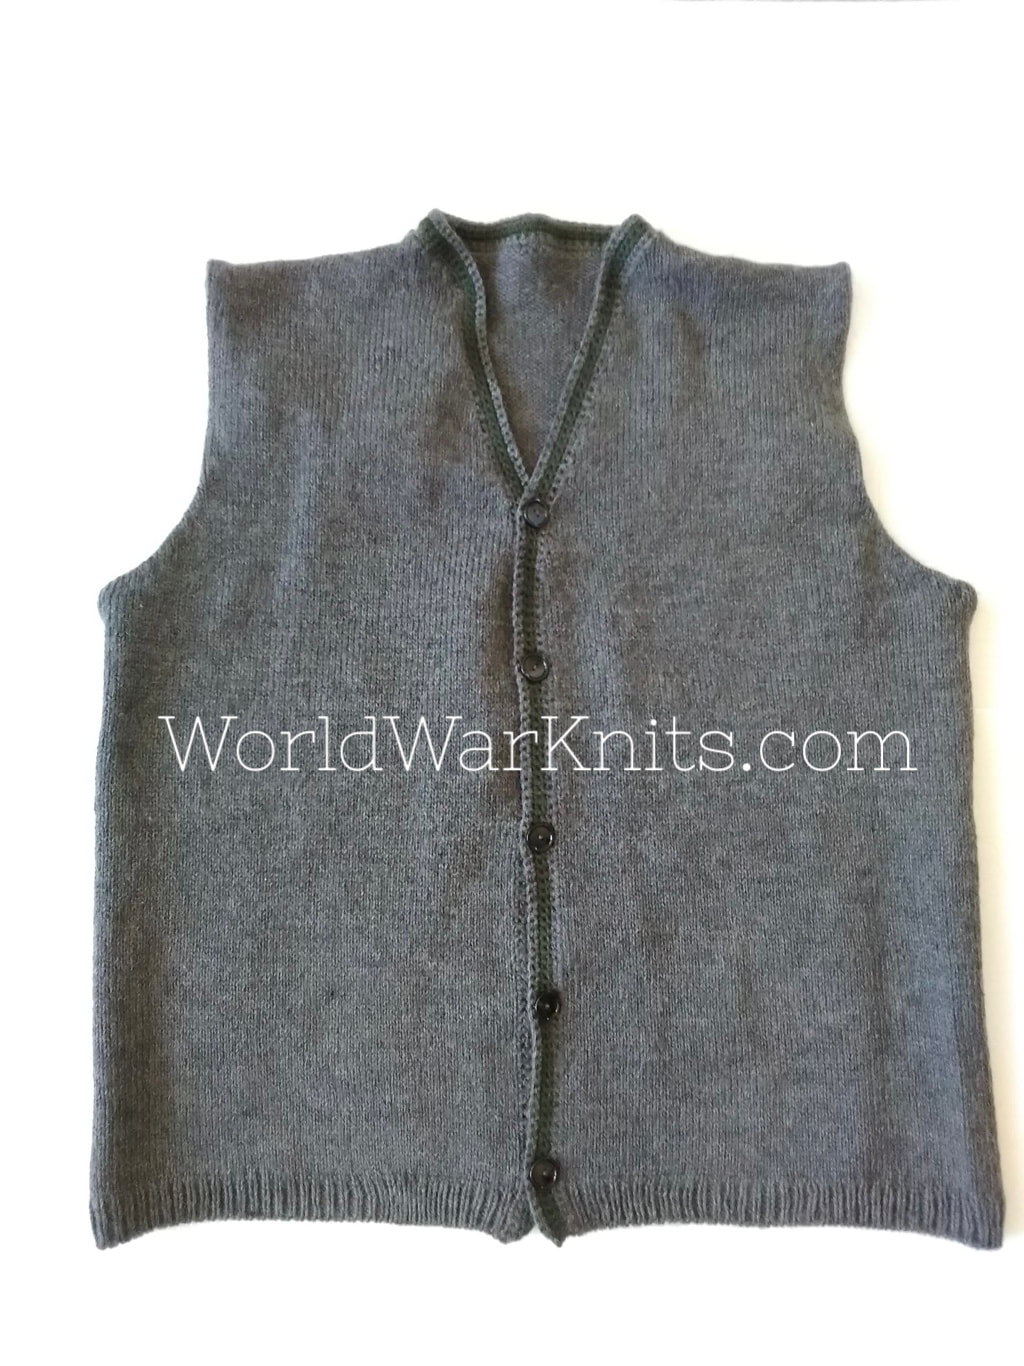 A custom vest I knitted for a WWI German reenactor. 